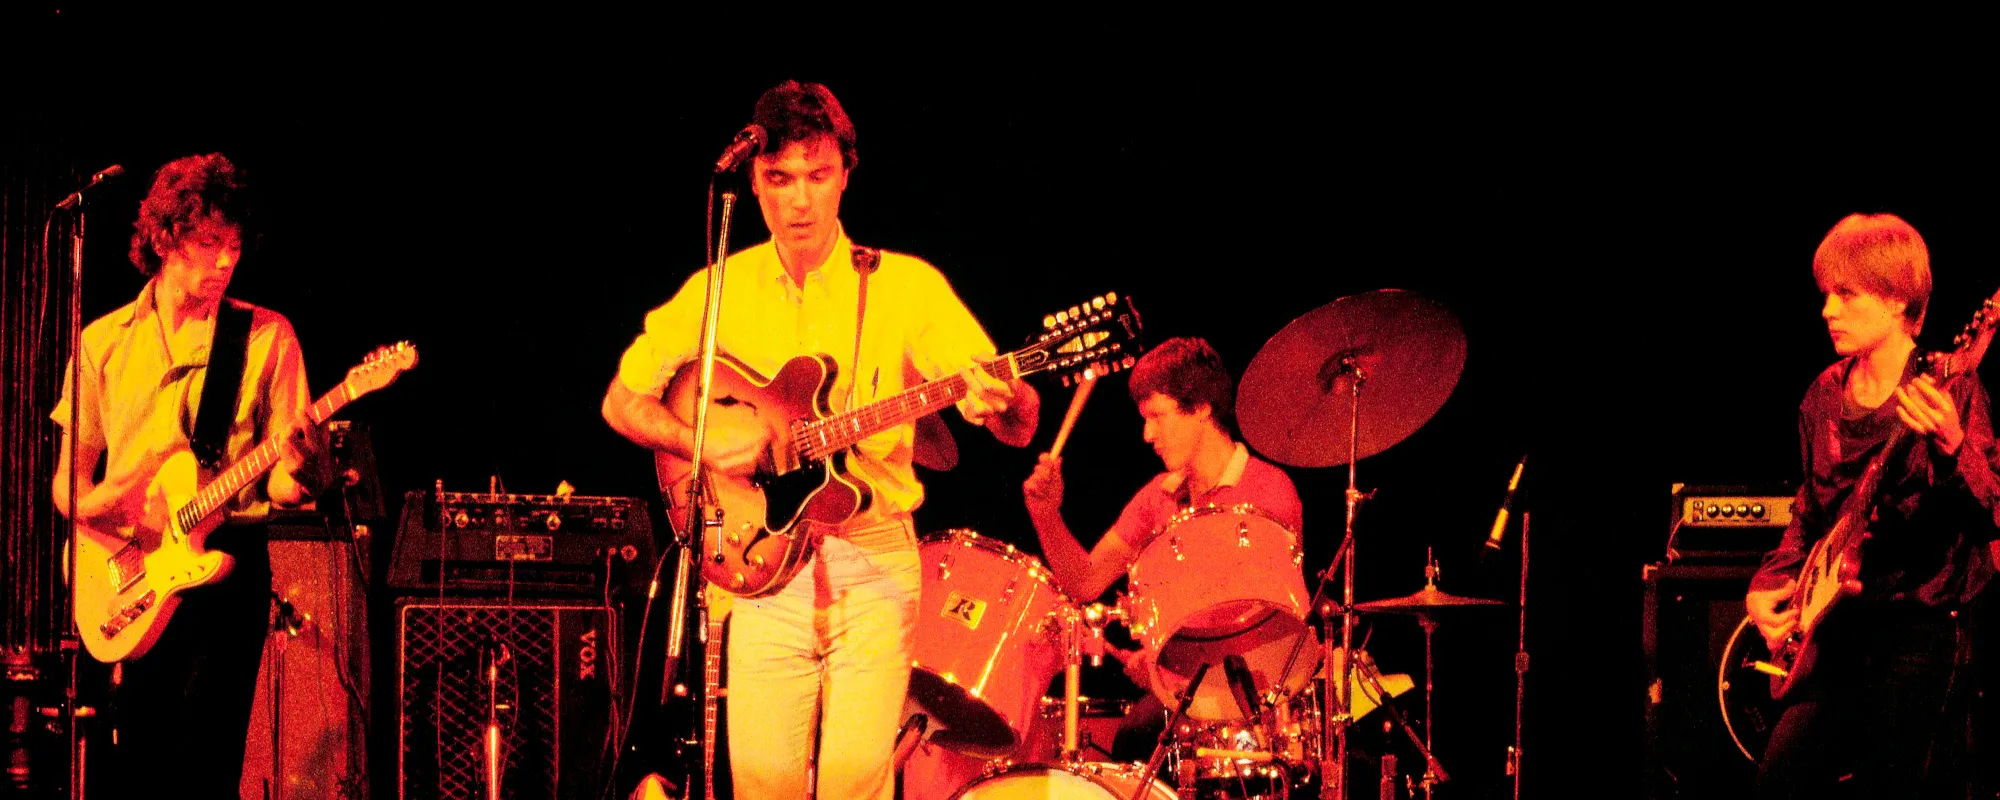 Review: Talking Heads’ ‘Stop Making Sense’  Gets Classy 40th Anniversary Upgrade